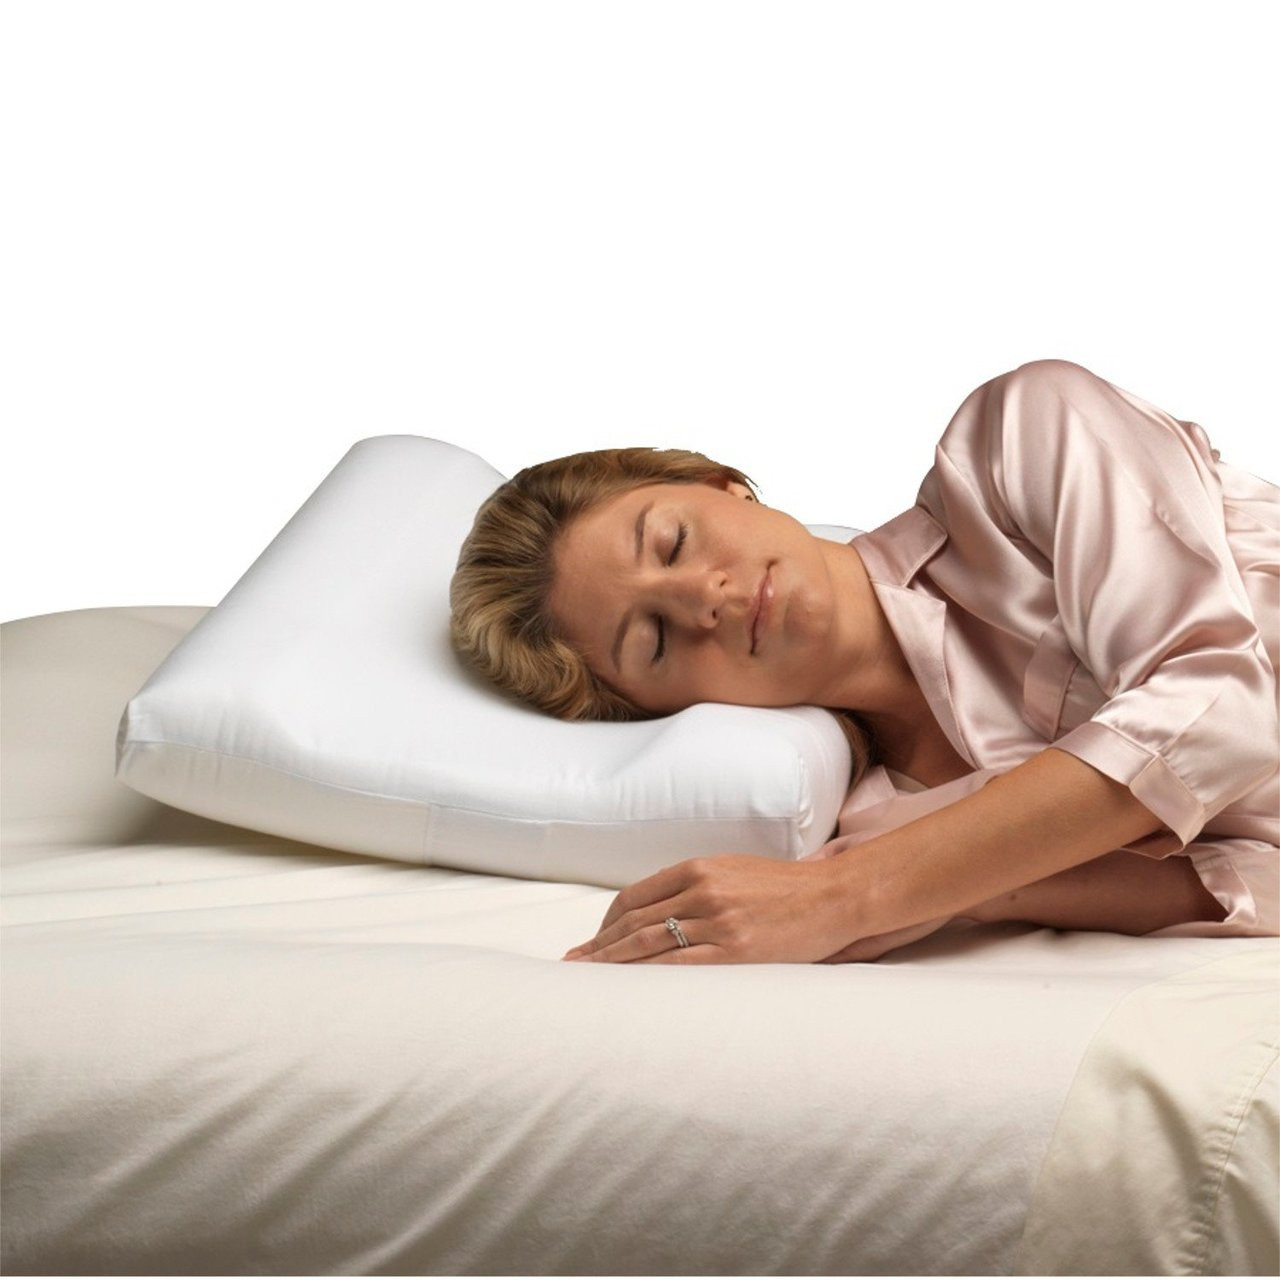 PCP Medical 6155 Full-size therapeutic cervical pillow (6155)